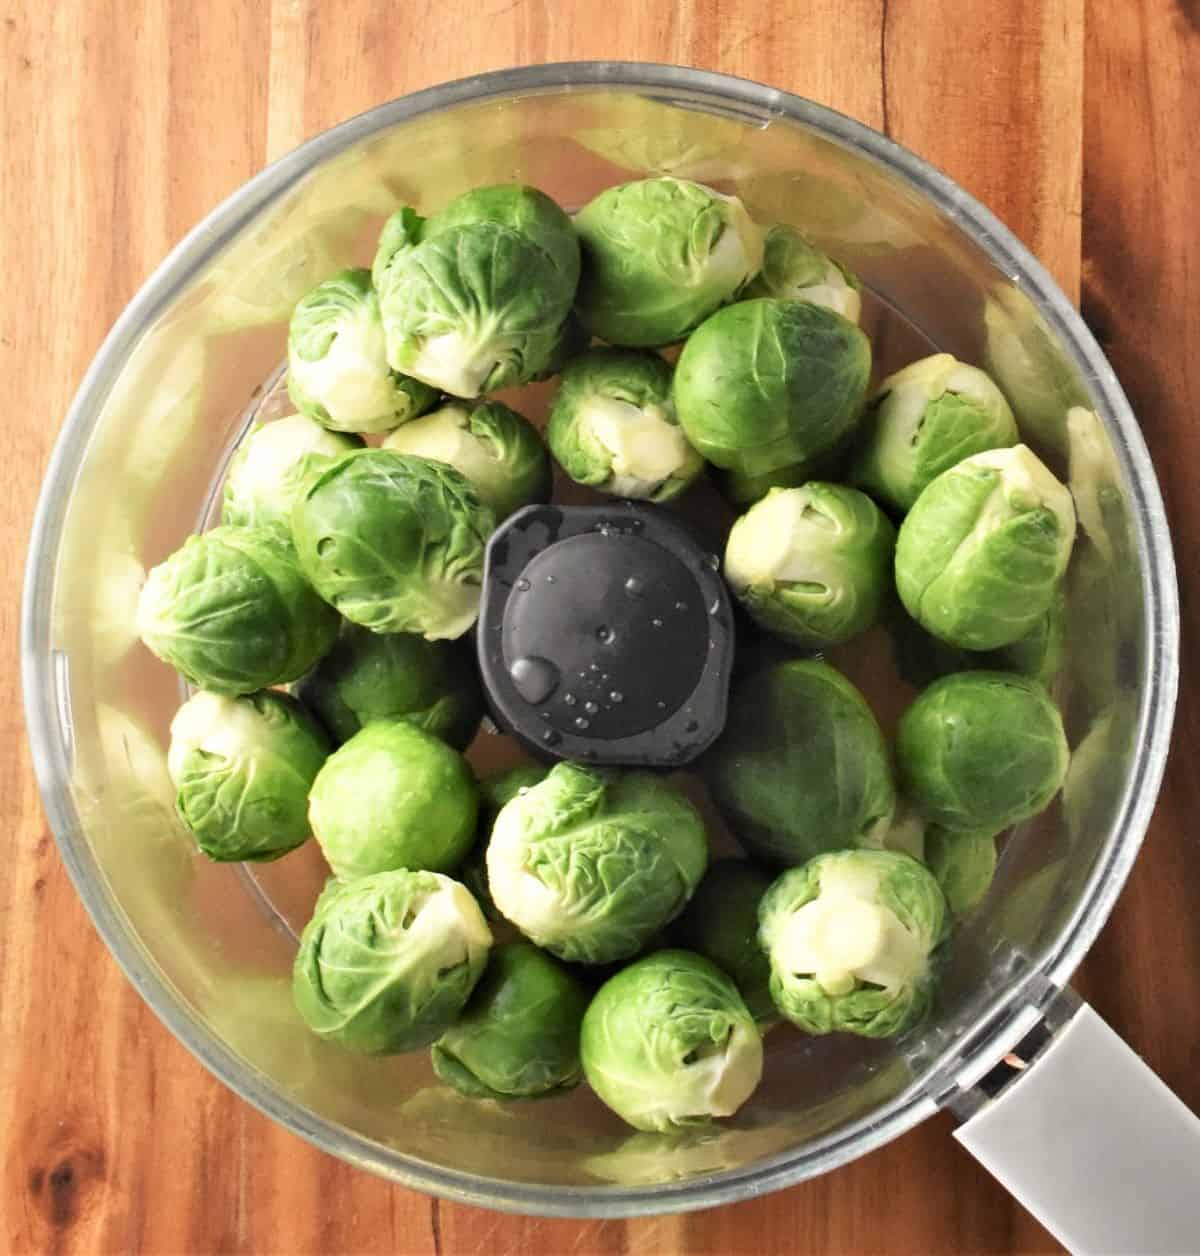 Whole brussels sprouts in blender bowl.